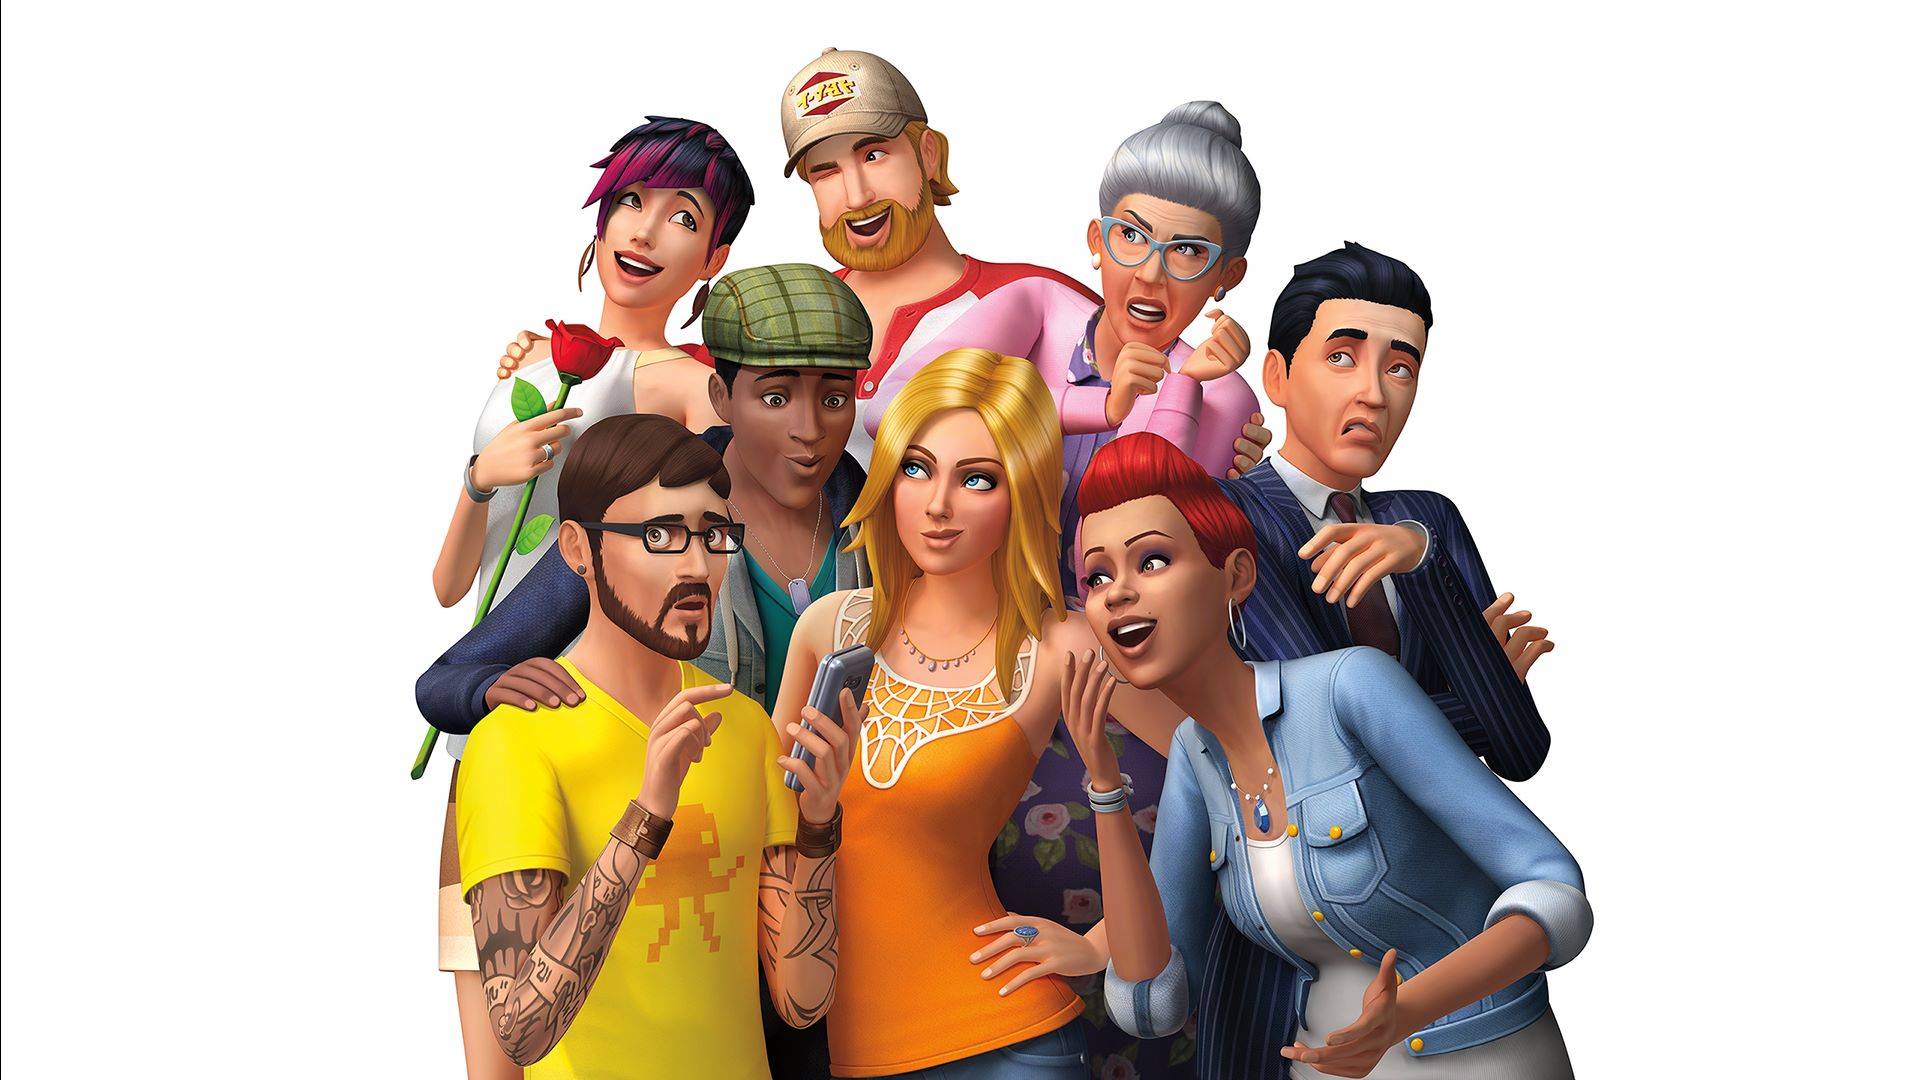 sims 4 download all expansions free